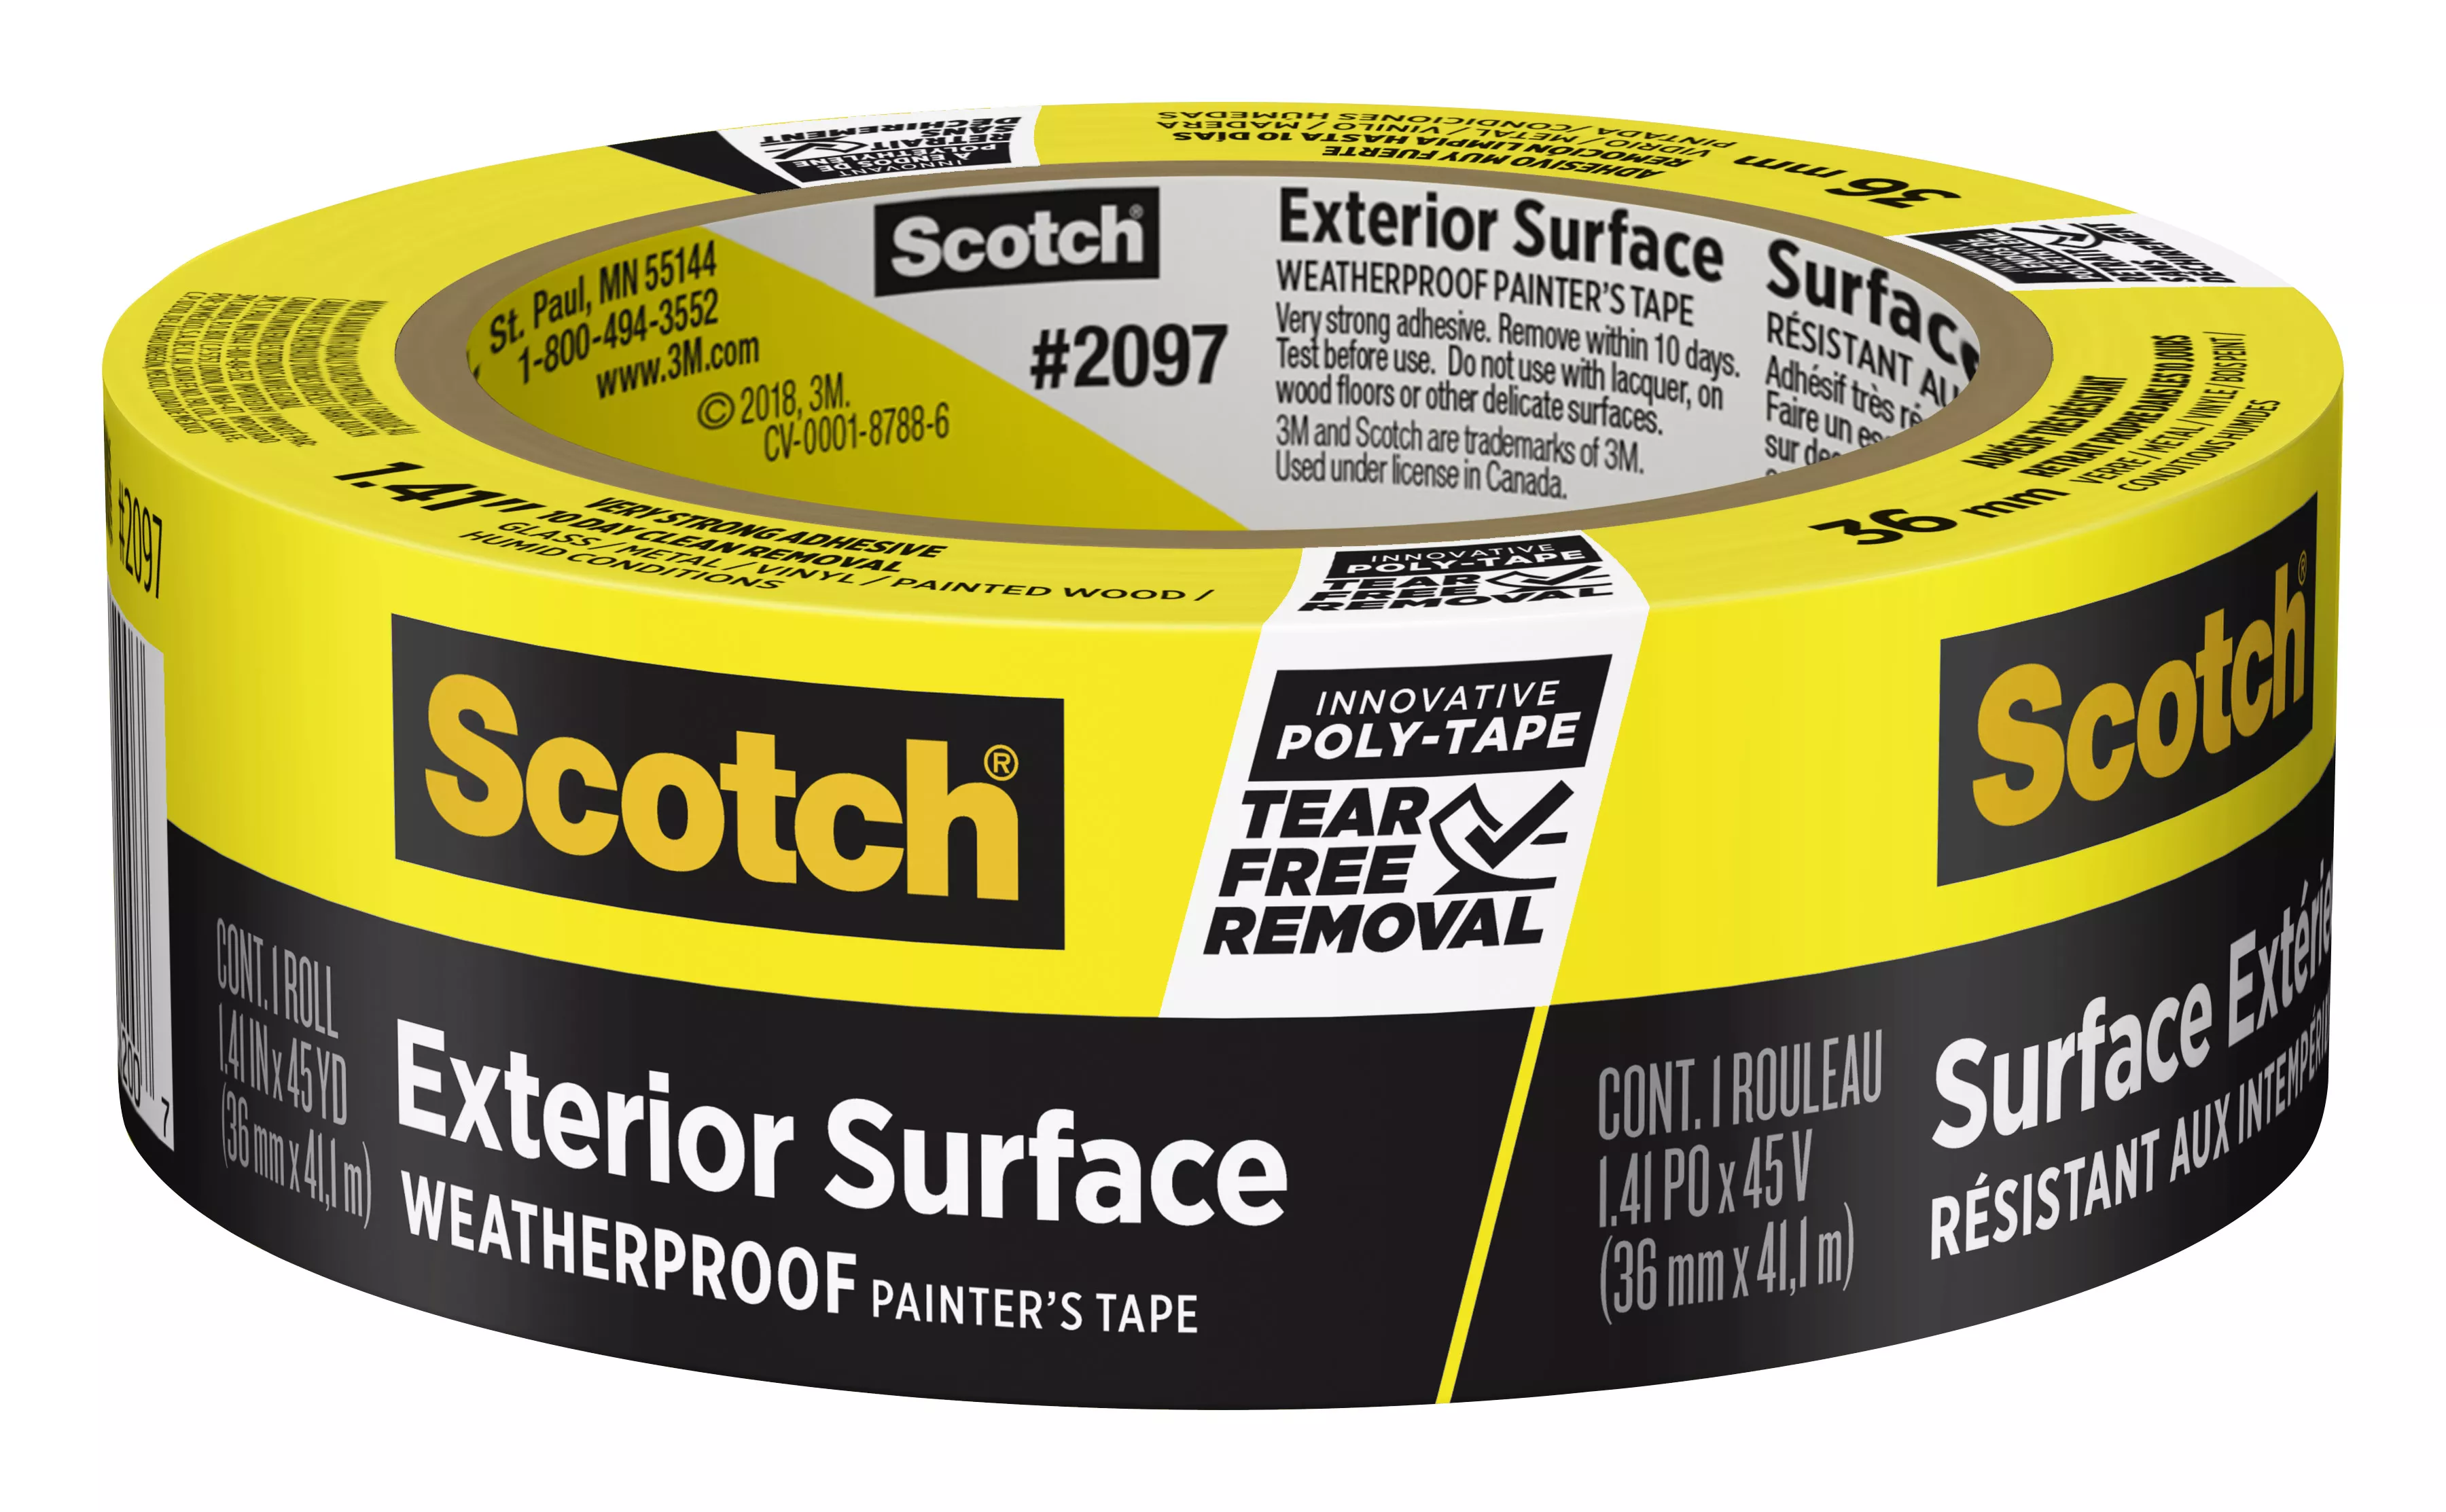 Scotch® Exterior Surface Painter's Tape 2097-36EC-XS, 1.41 in x 45 yd
(36mm x 41,1m)